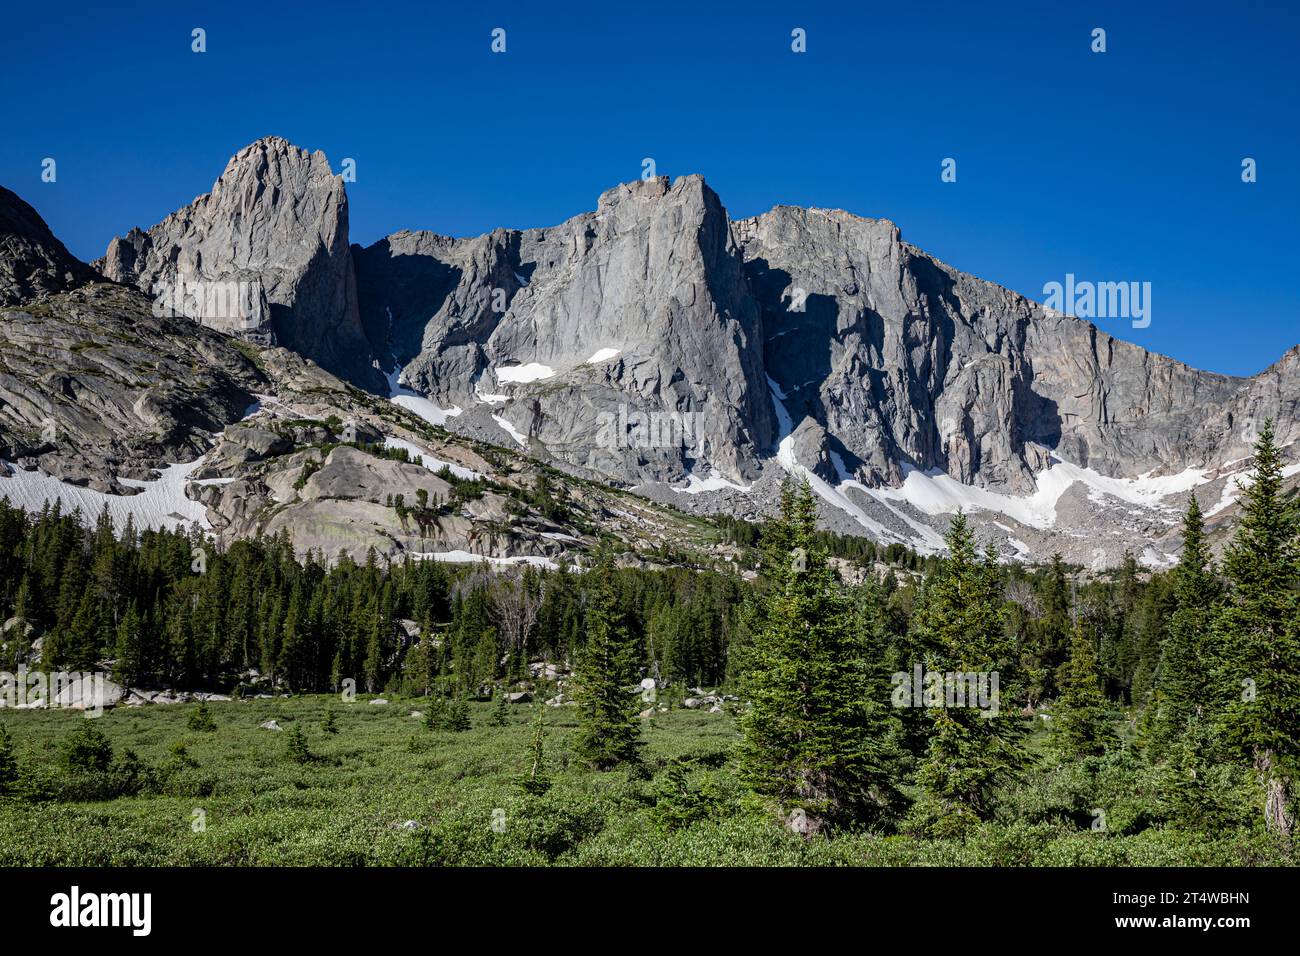 WY05562-00...WYOMING - - Warbonnet, Warrior and Warrior 2 Peaks from the North Fork Trail in the Cirque of the Towers in the Popo Agie Wilderness. Stock Photo